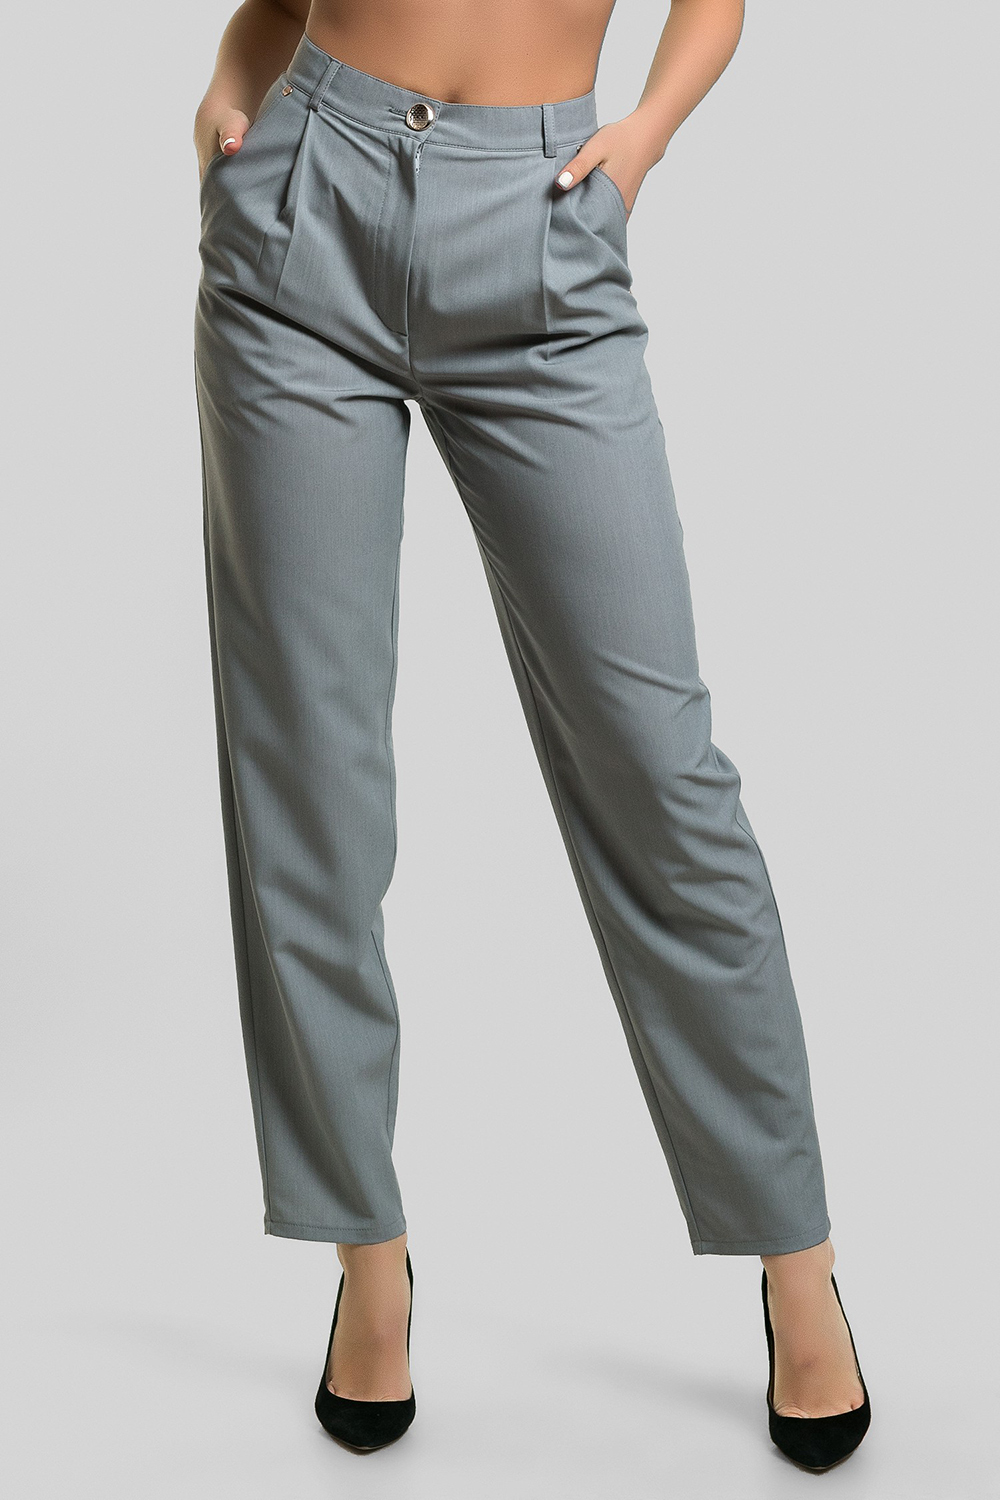 Gray straight trousers